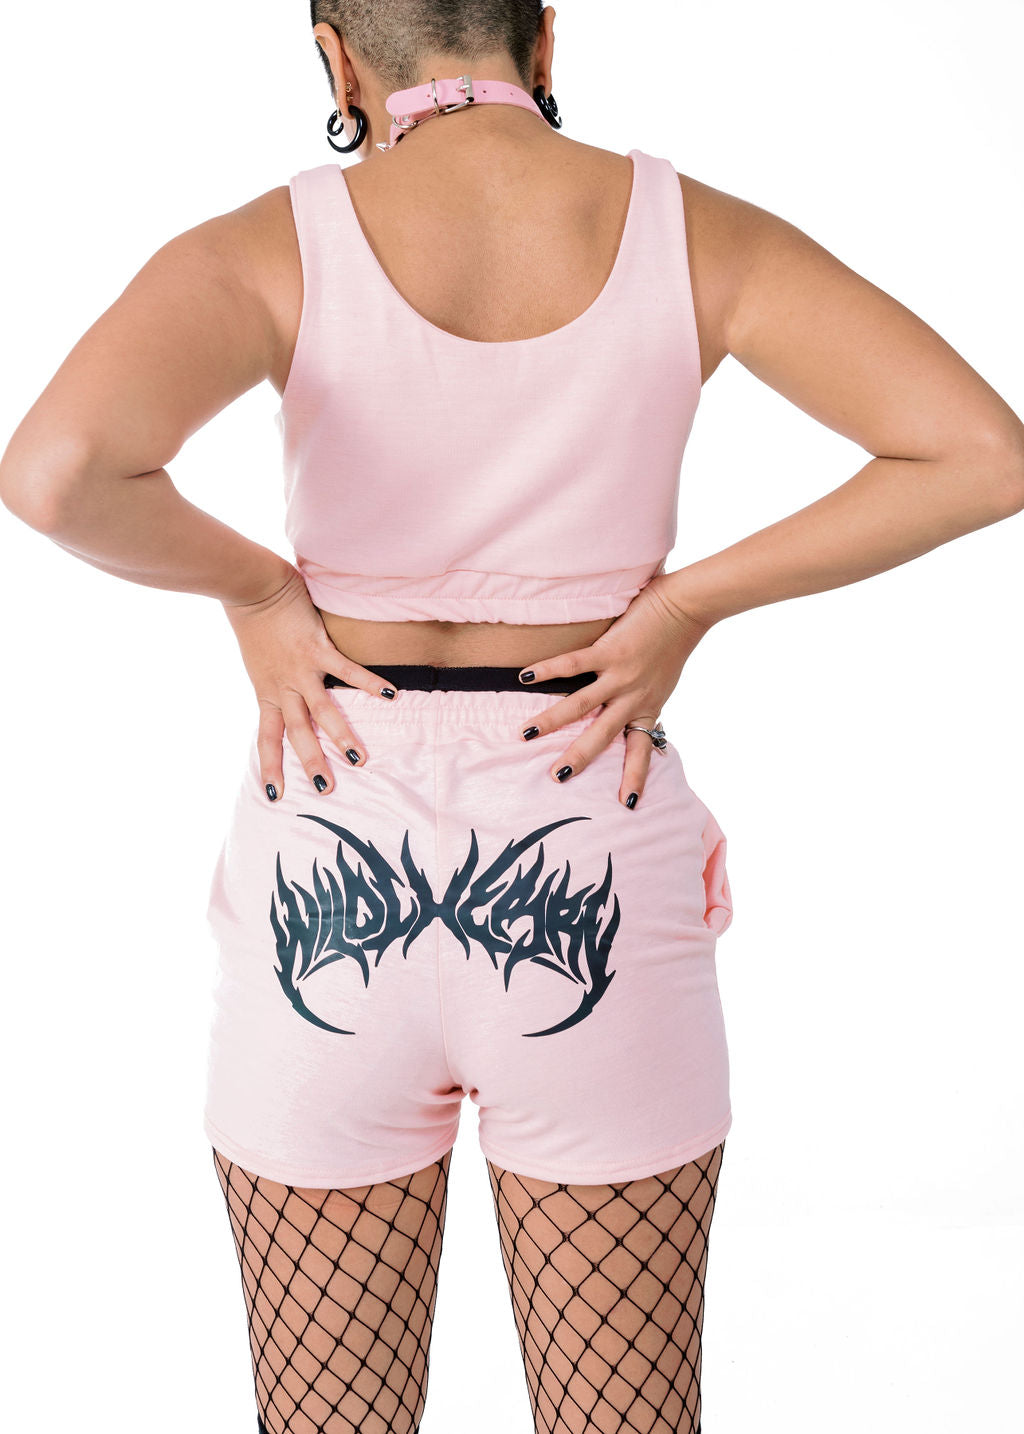 Let's Hang Out Shorts - Pink With Black Print